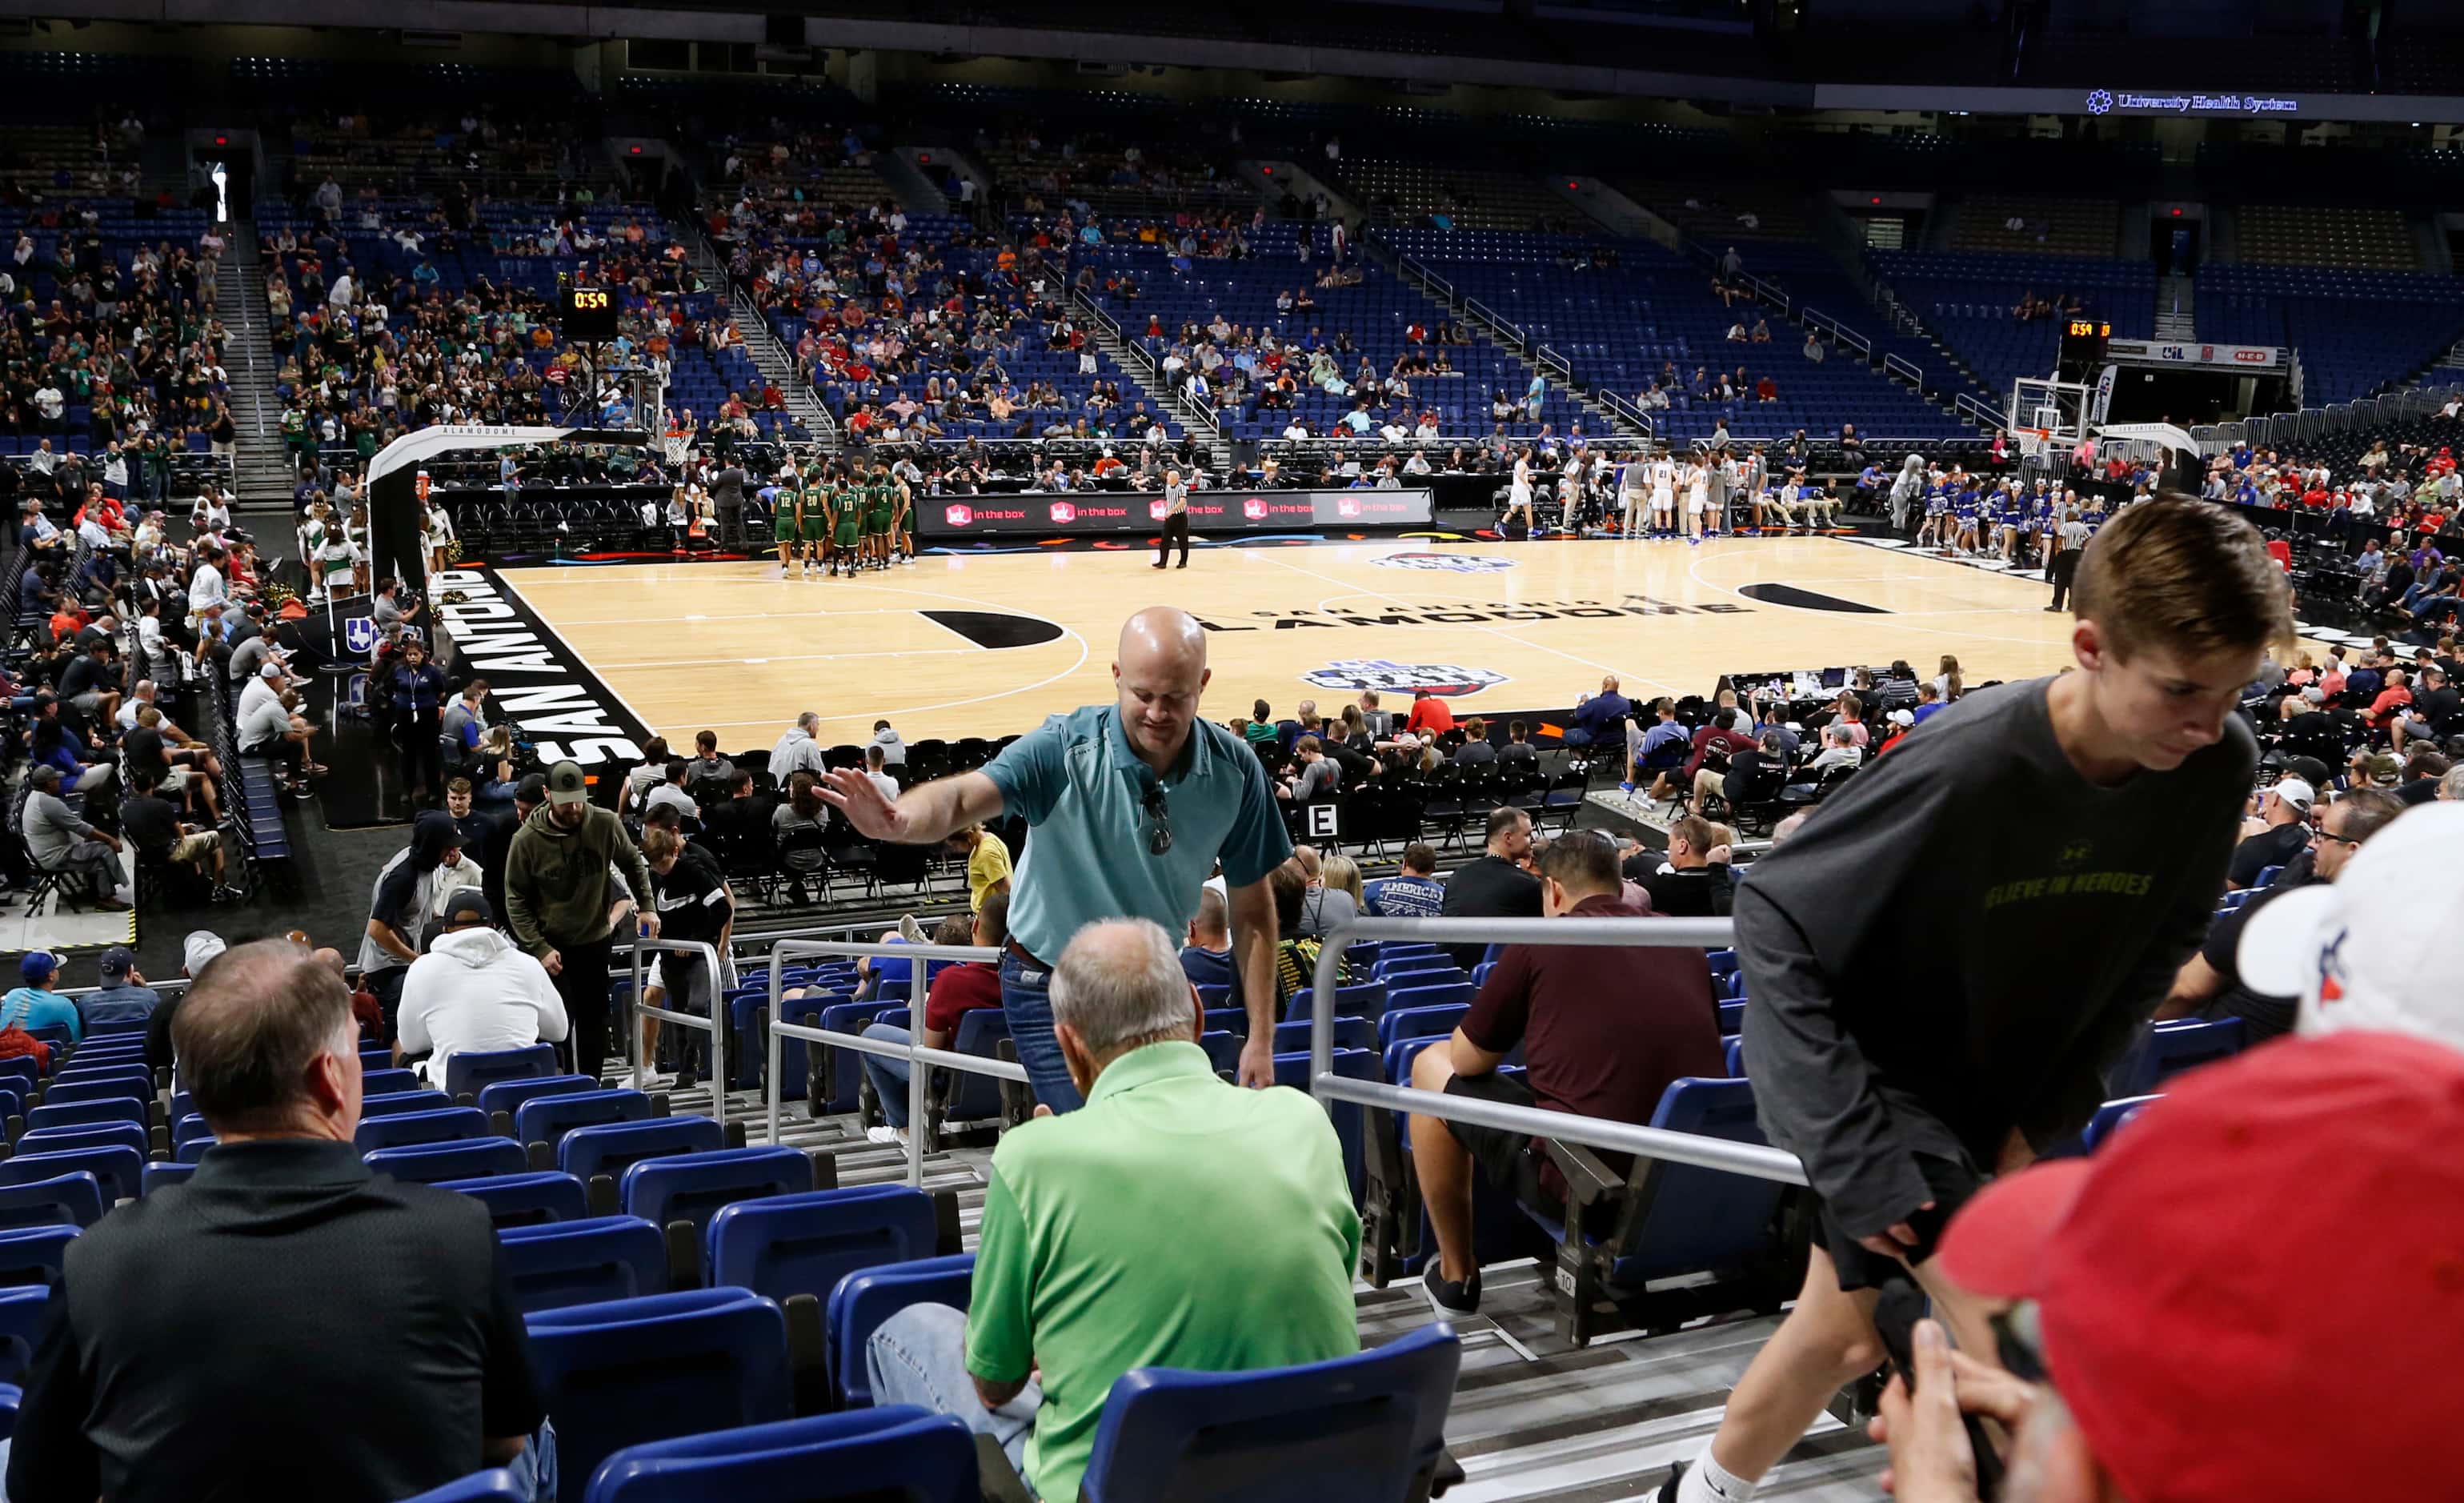 At the conclusion of the Final 3A game, fans depart as the rest of thee tournament was...